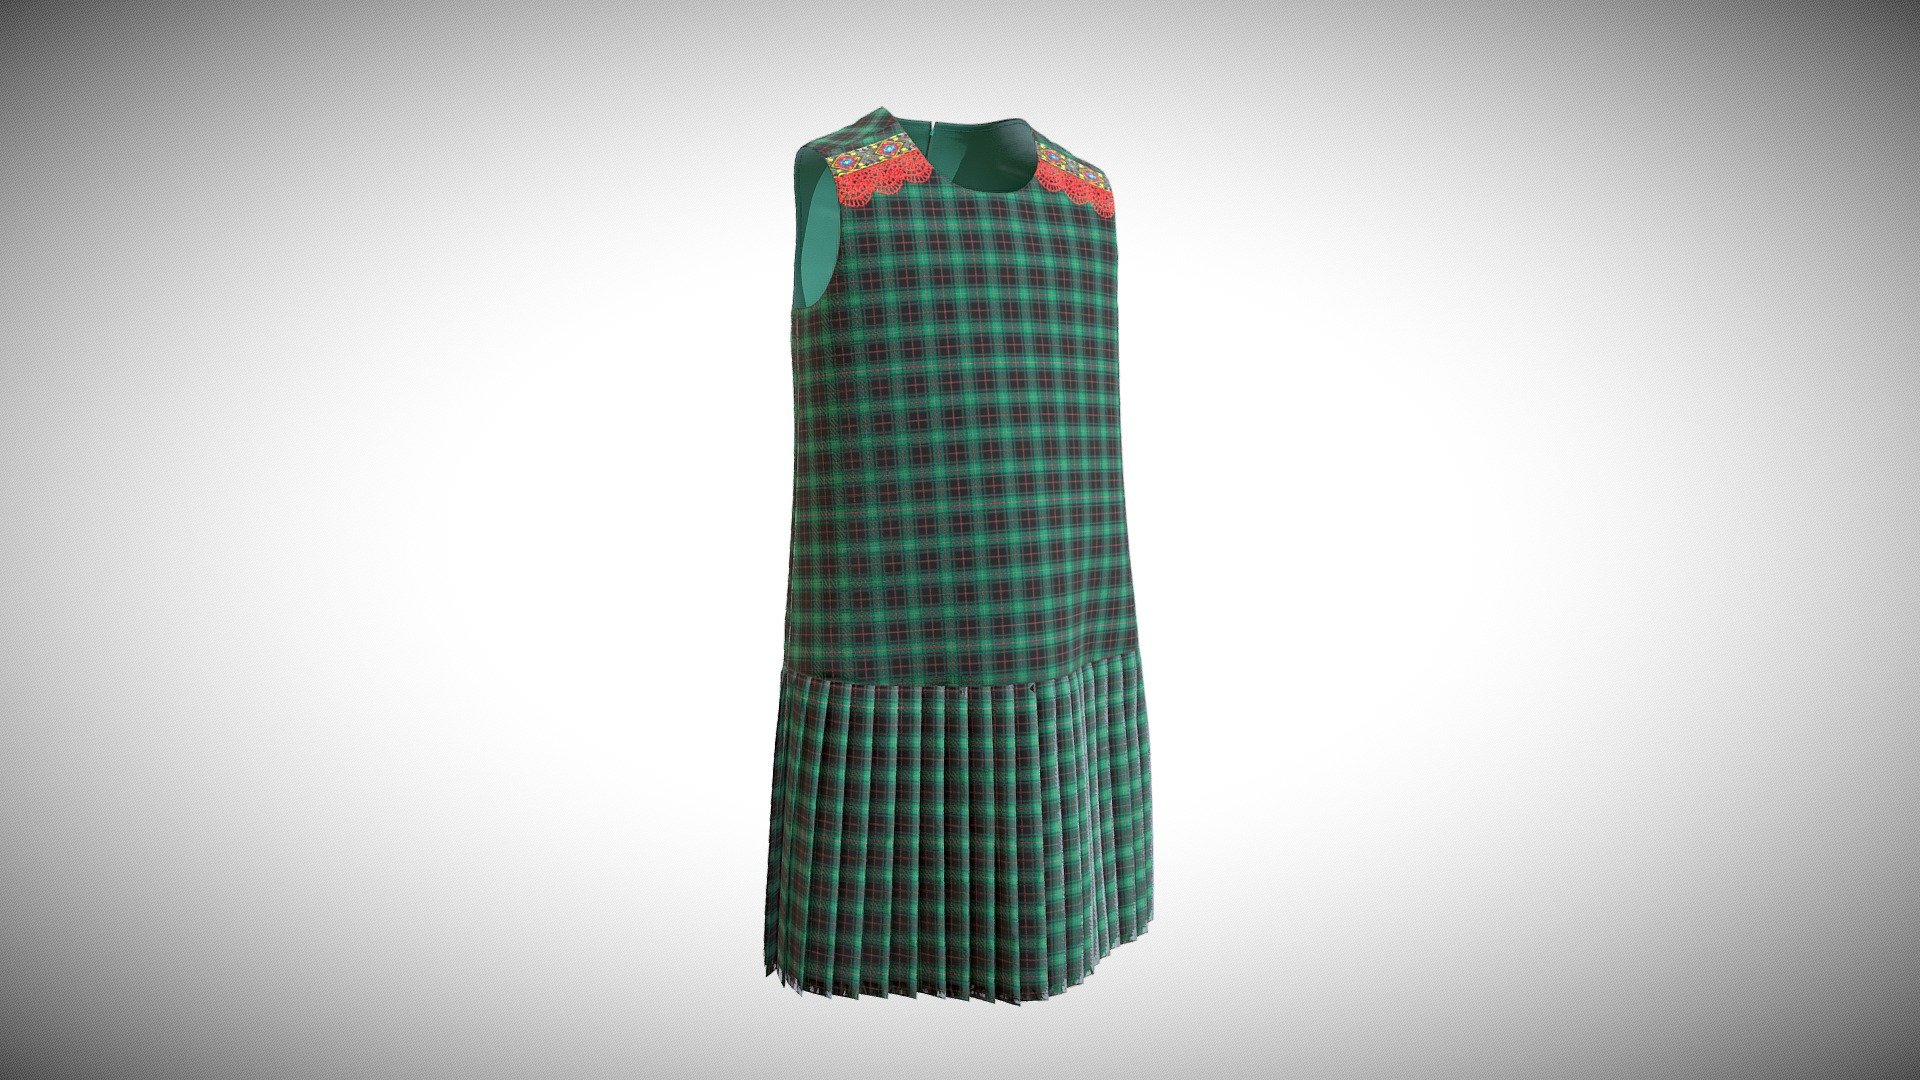 The 3D model presents a 3D reconstruction of a pinafore dress for kids (Design patent application # 2023502369). The dress consists of the front and back parts. The garment is made of checkered fabrics. The 3D model was created in Clo3D software, textured in Substance Painter and post-processed in 3dsMax.

The authors of the 3D model are Mariia Moskvina and Aleksei Moskvin (Saint Petersburg State University of Industrial Technologies and Design)

https://independent.academia.edu/MariiaMoskvina

https://independent.academia.edu/AlekseiMoskvin - Pinafore dress for kids (Design patent) - 3D model by Mariia Moskvina (@mariia89) 3d model